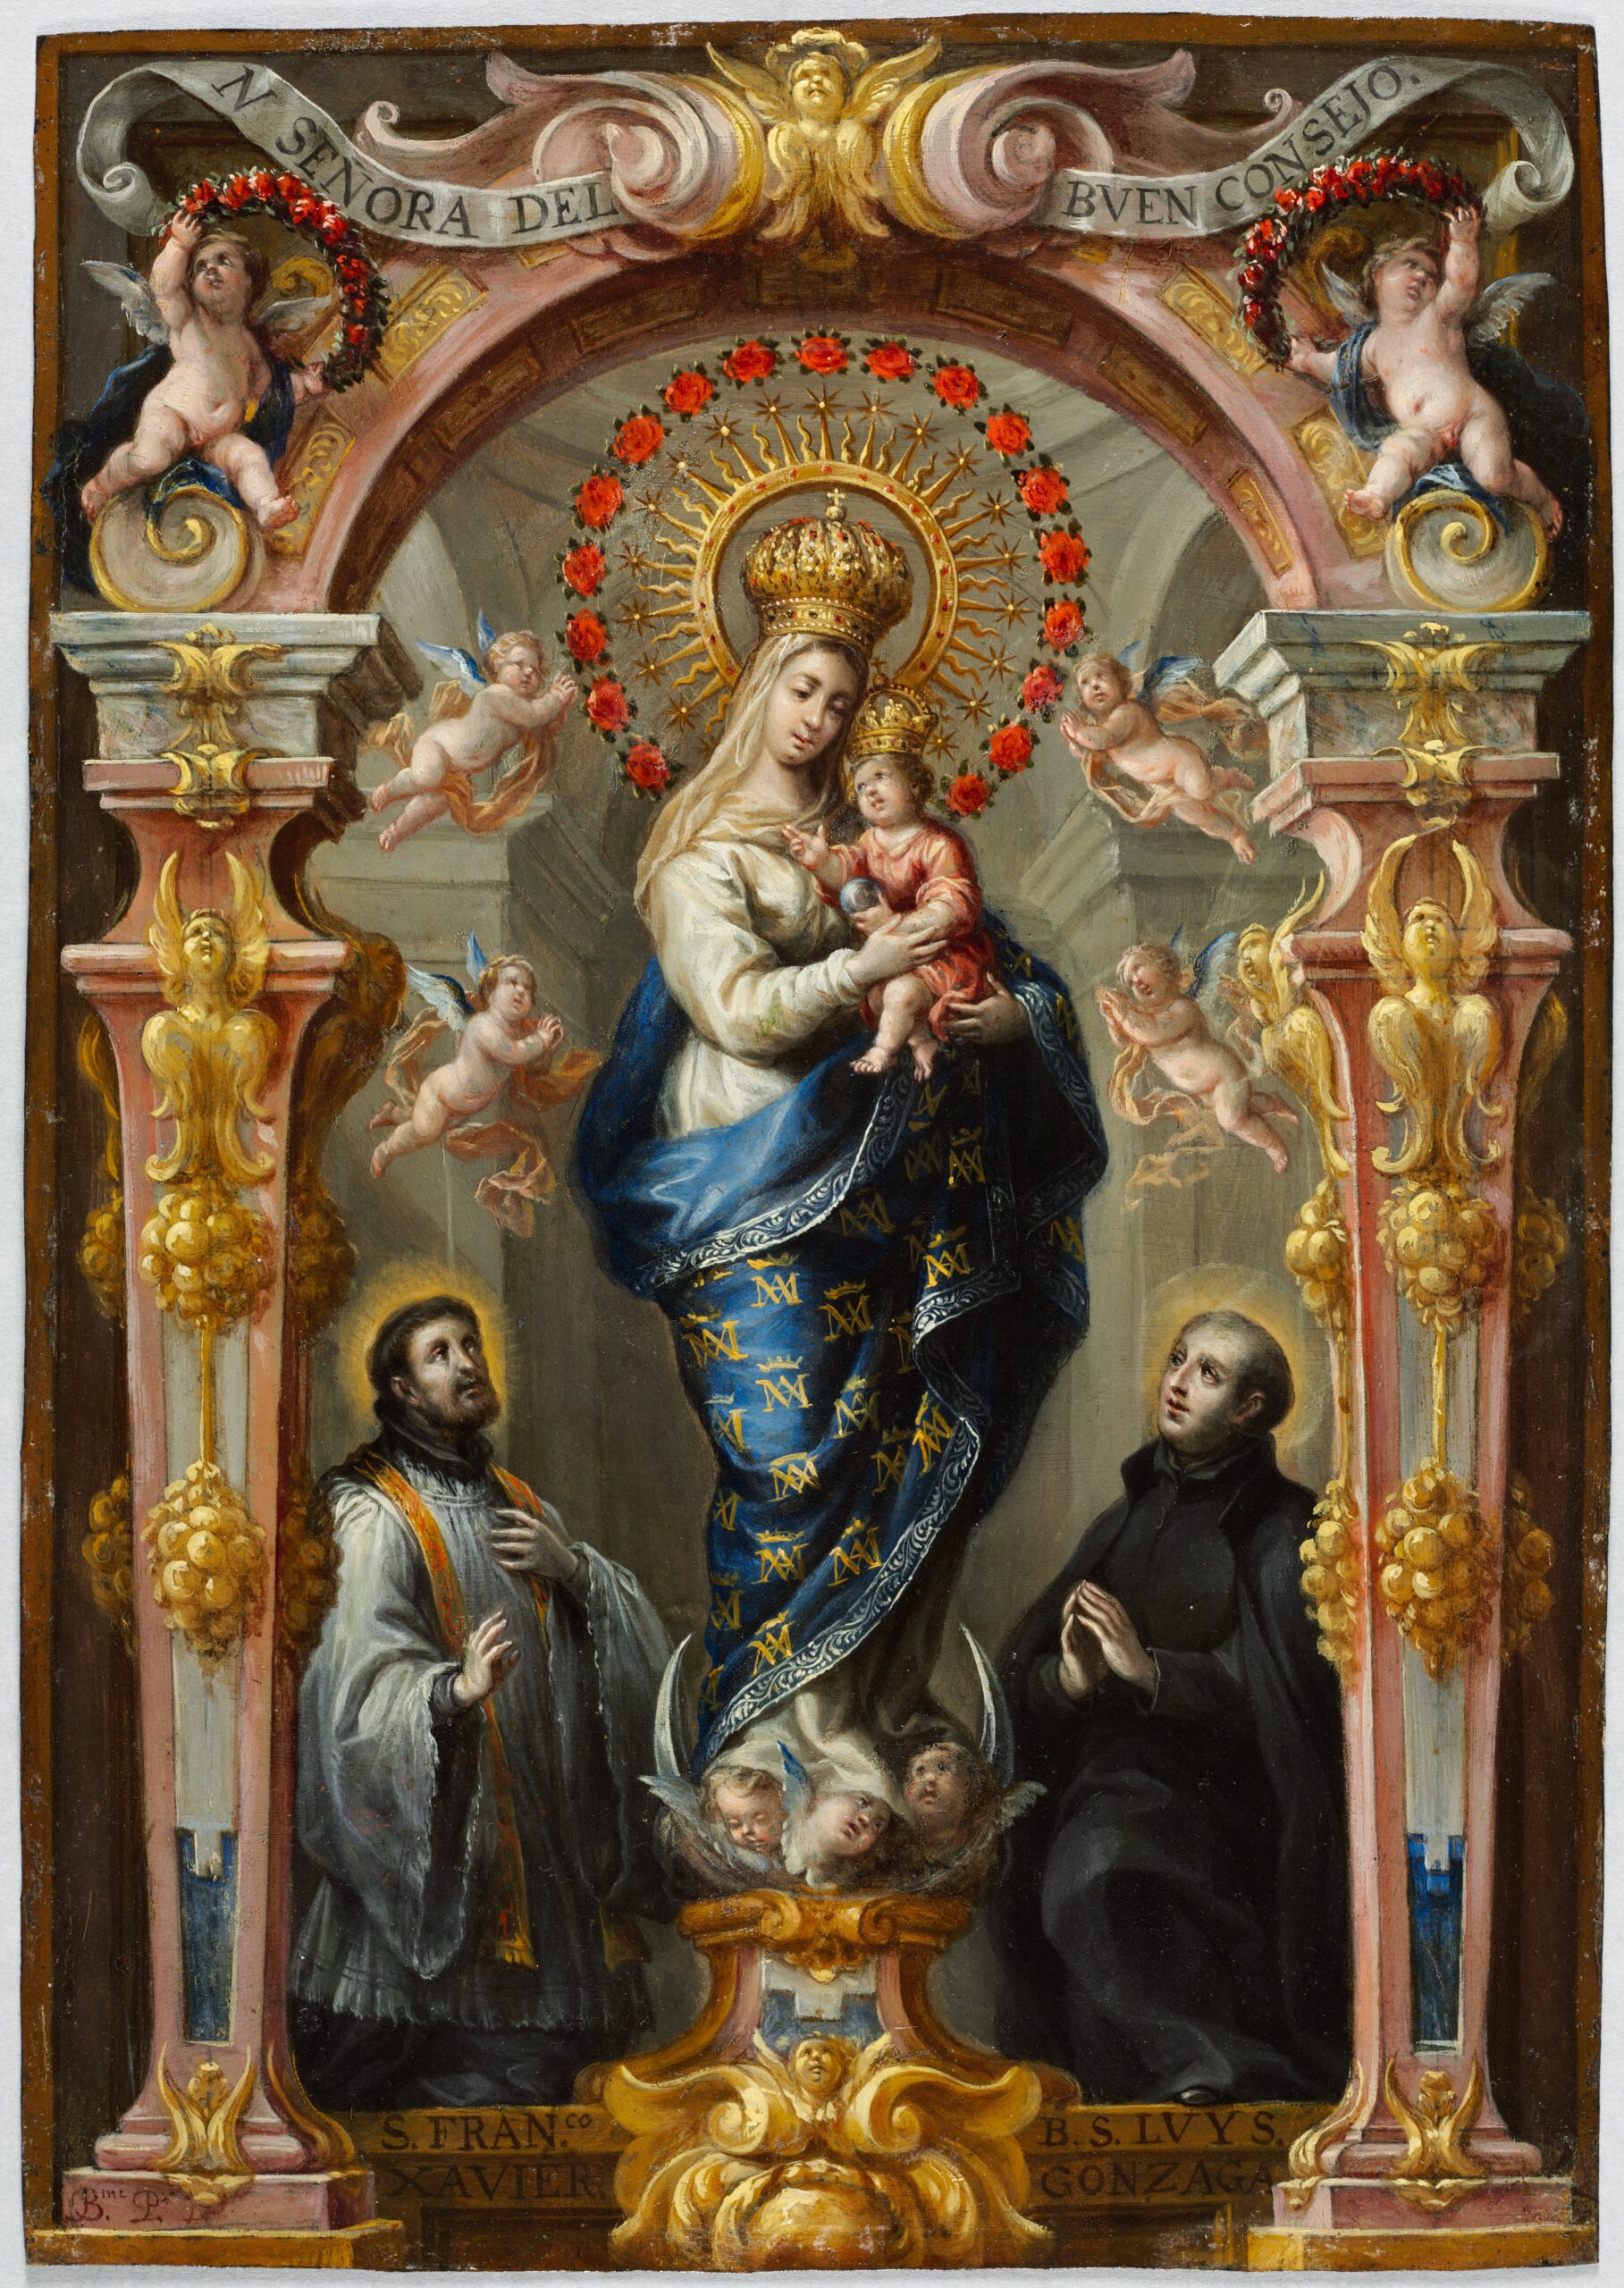 Devotion to Our Lady of Good Counsel